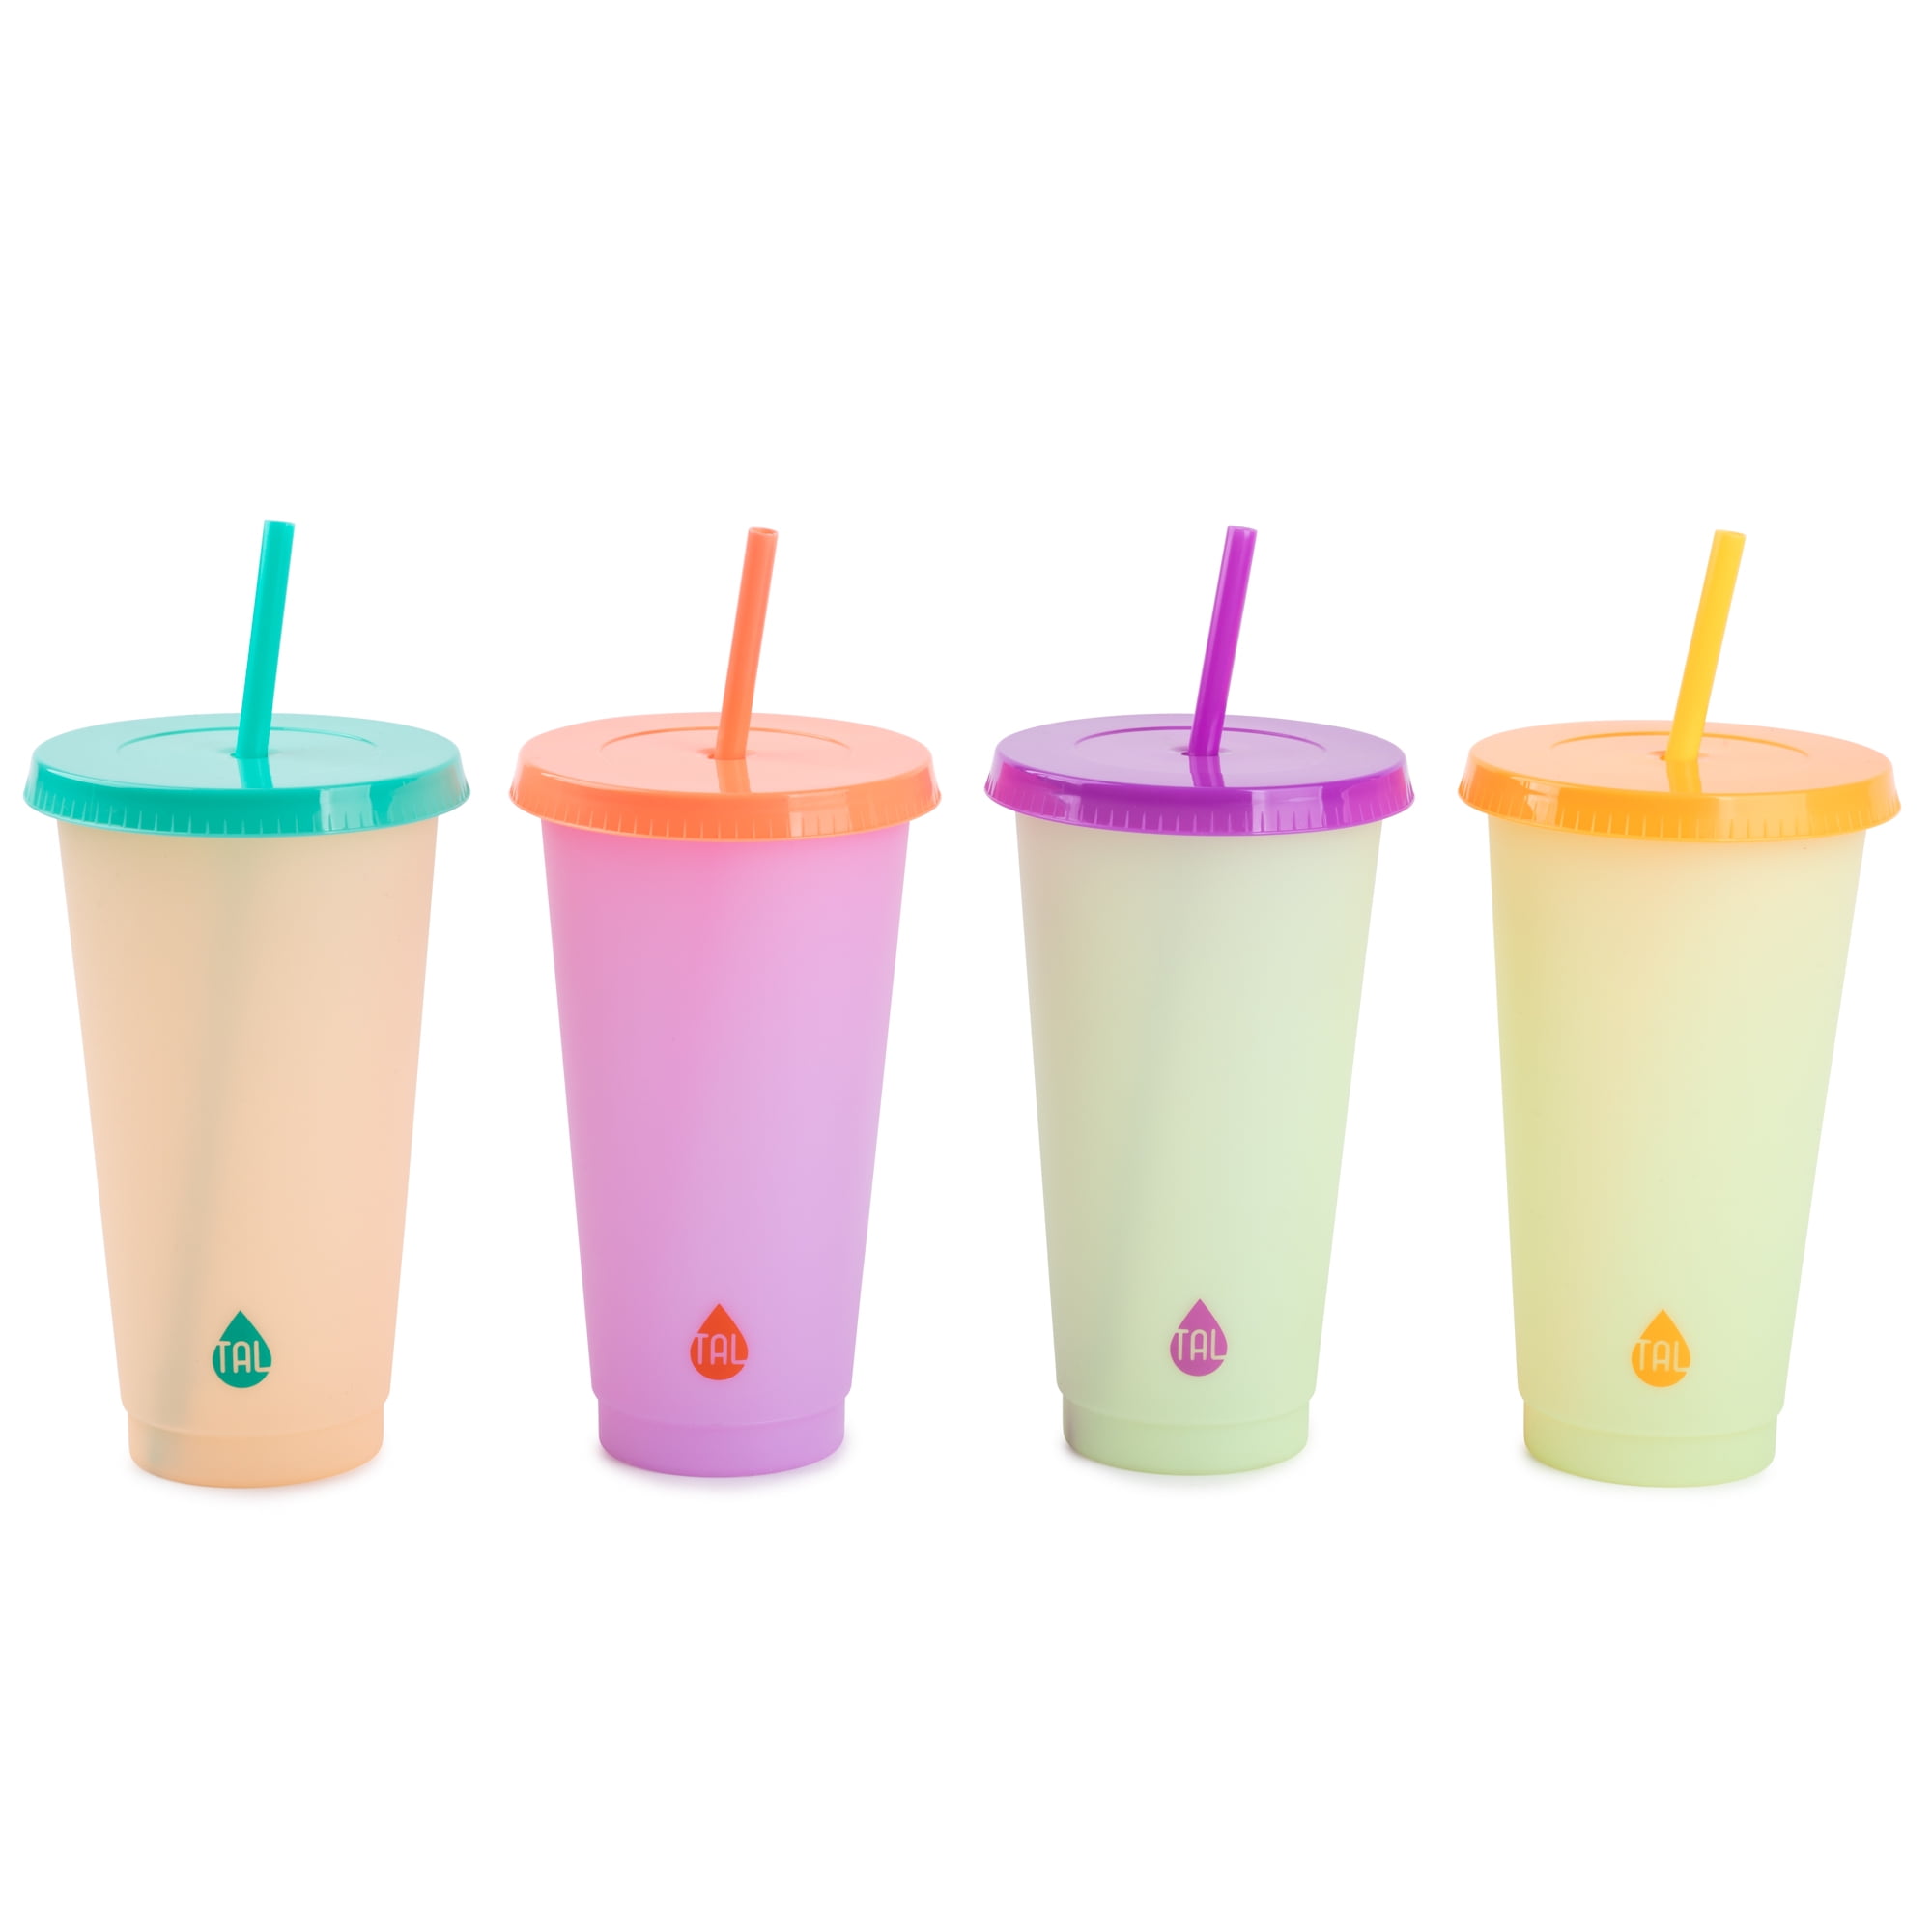 Details about   Manna 12 Pack Hot Color Changing Reusable-To-Go Cups With Lids 16Oz Brand New 